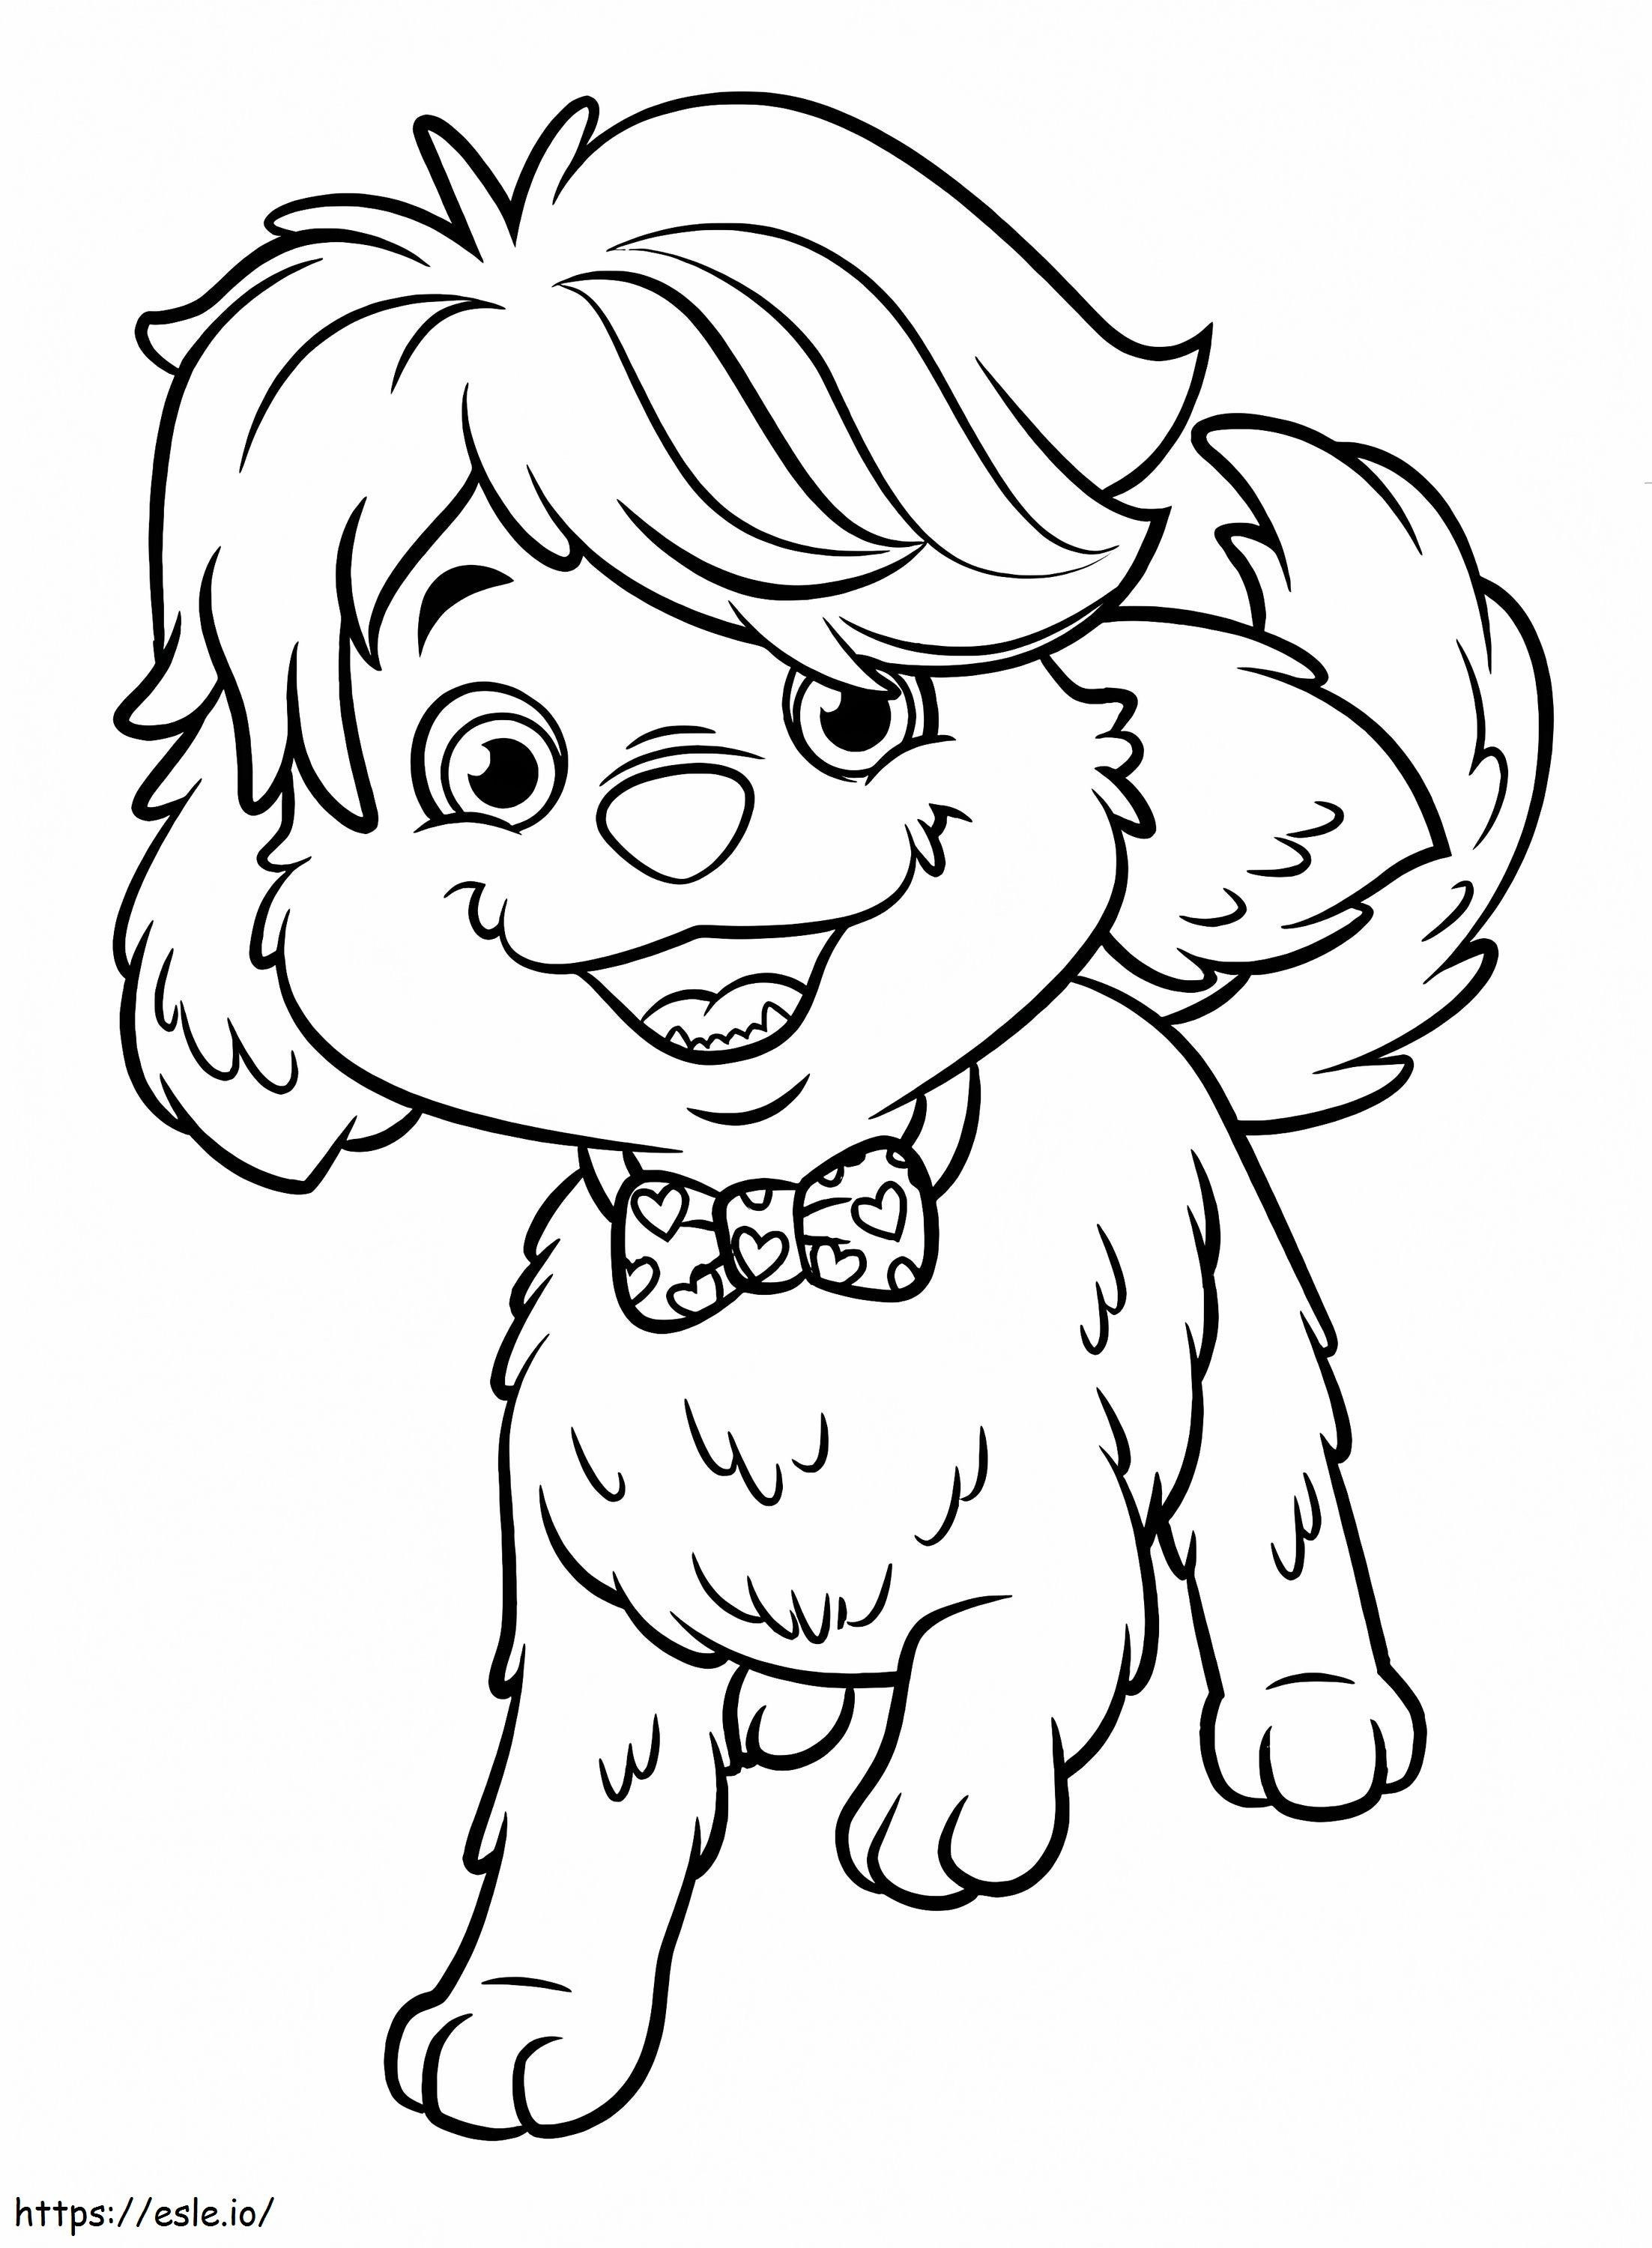 Cute Doodle coloring page